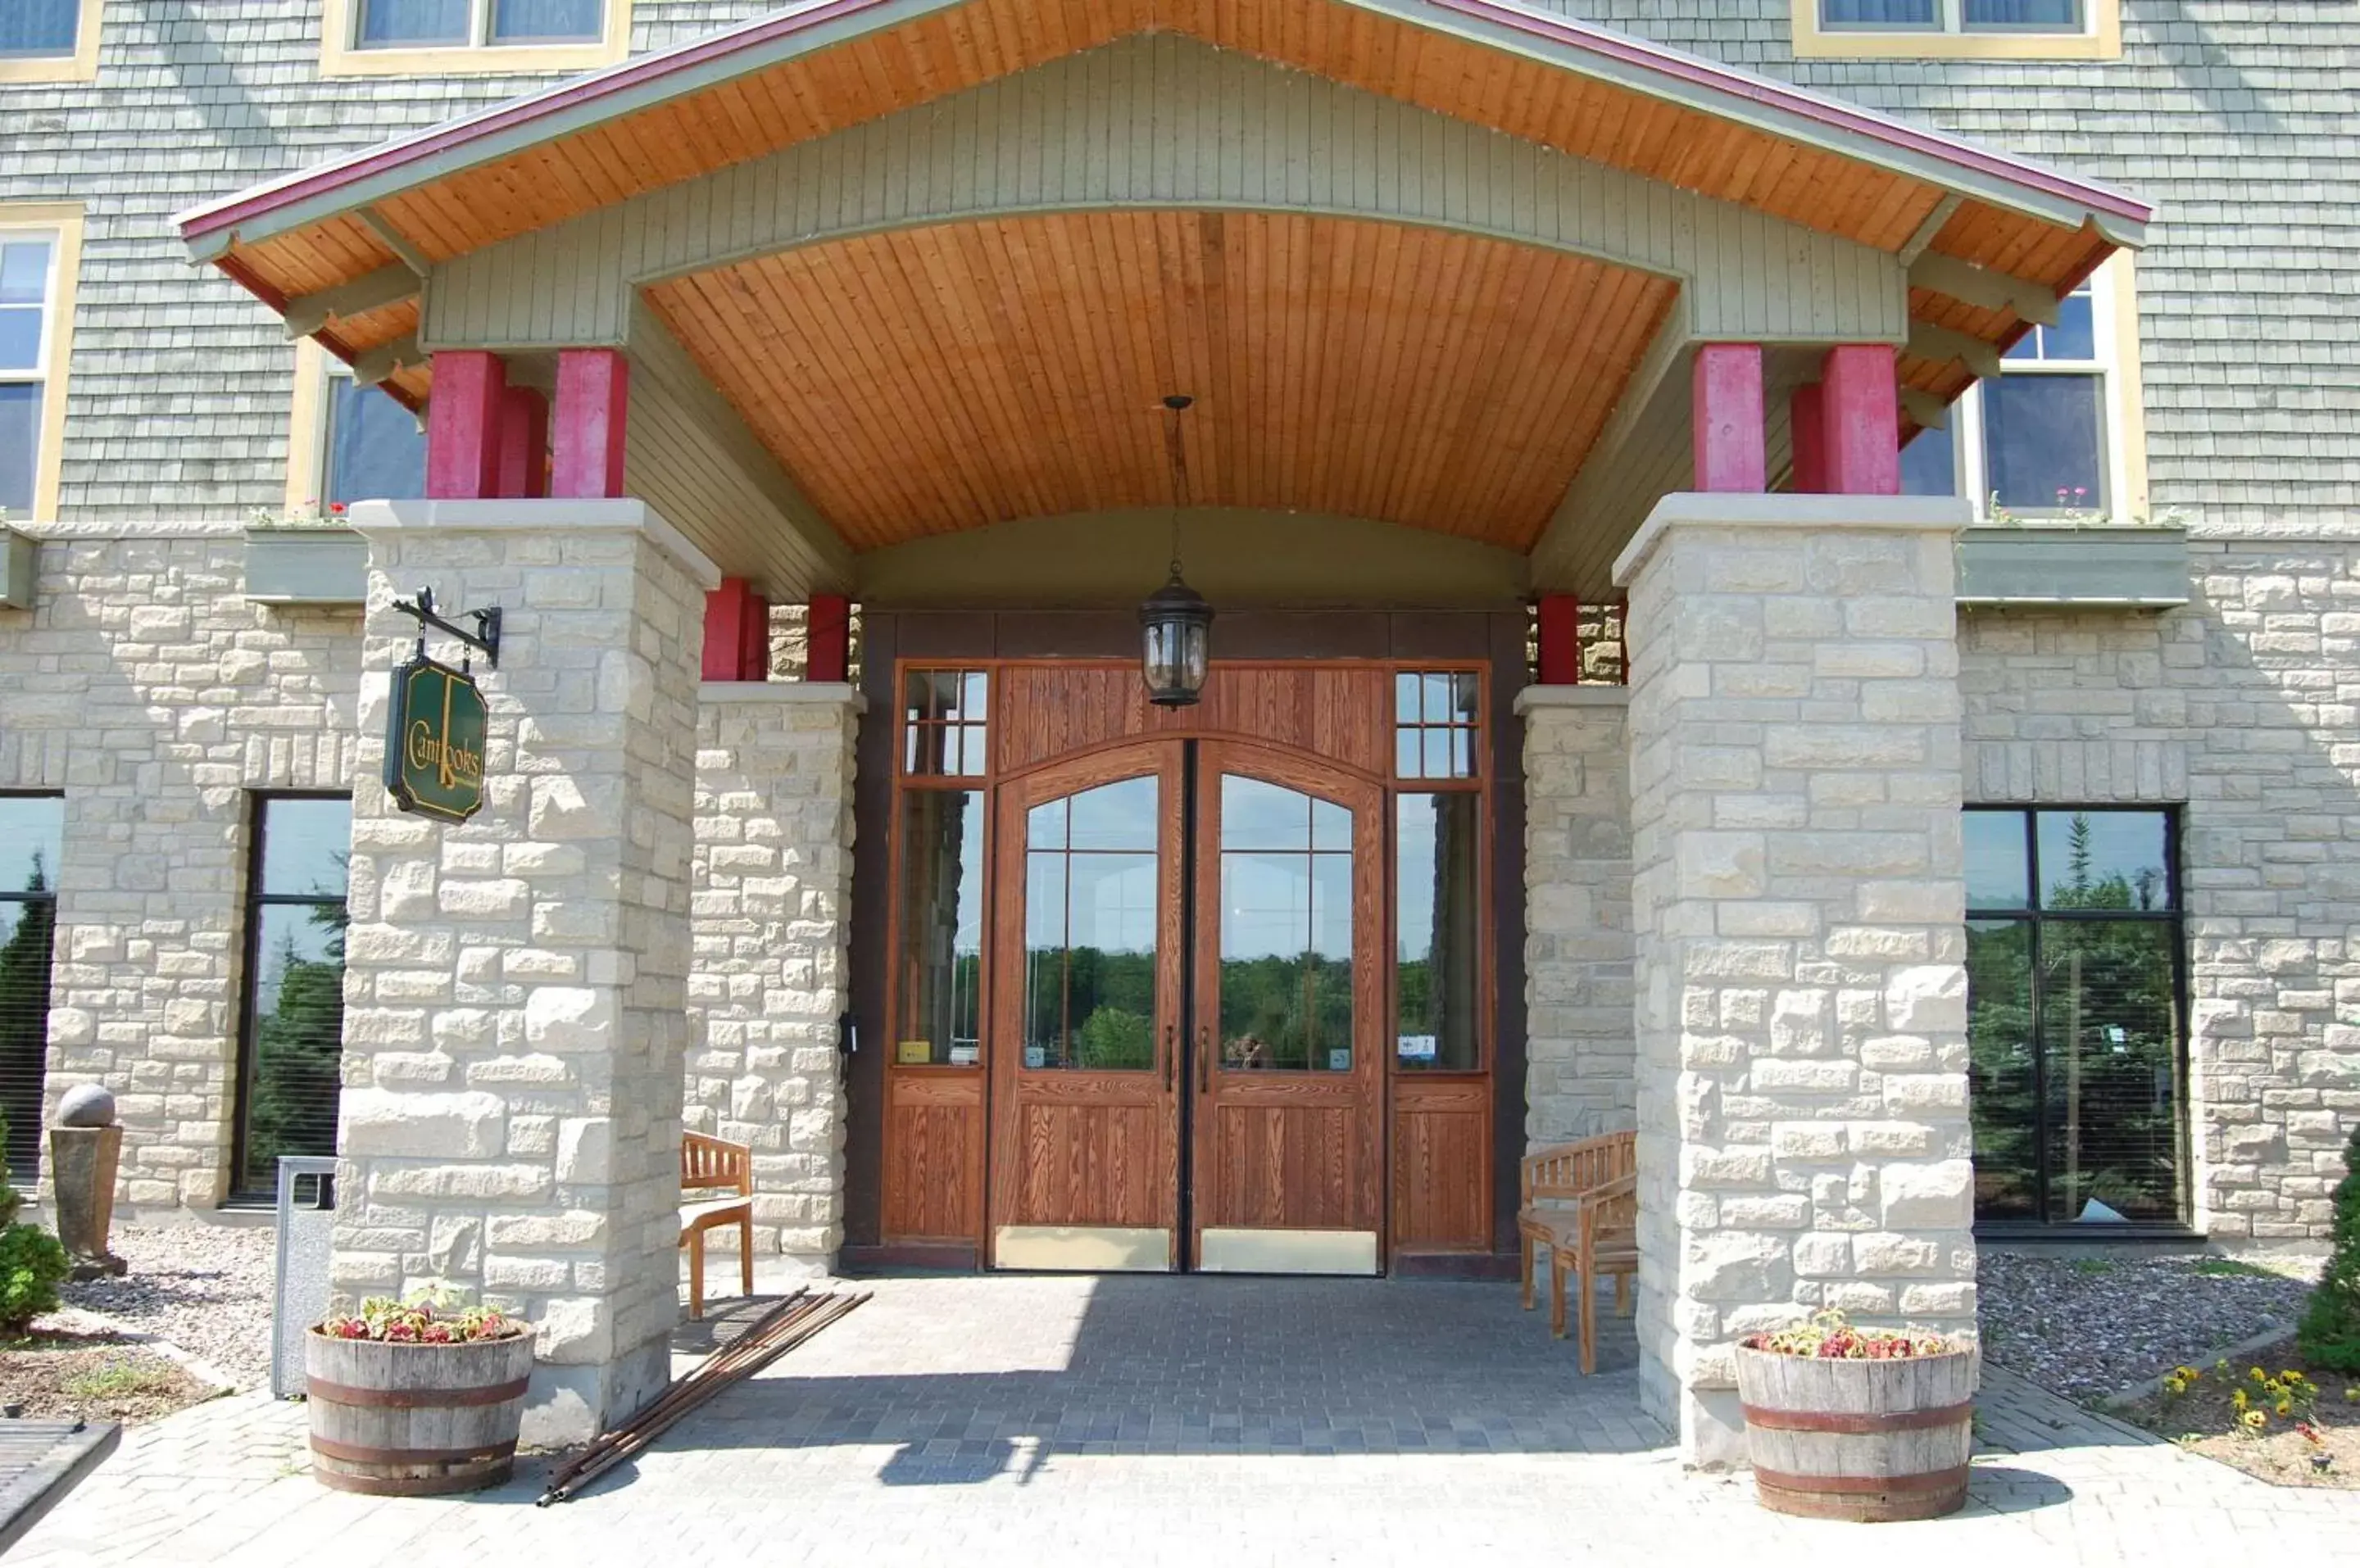 Property building in Calabogie Peaks Hotel, Ascend Hotel Collection